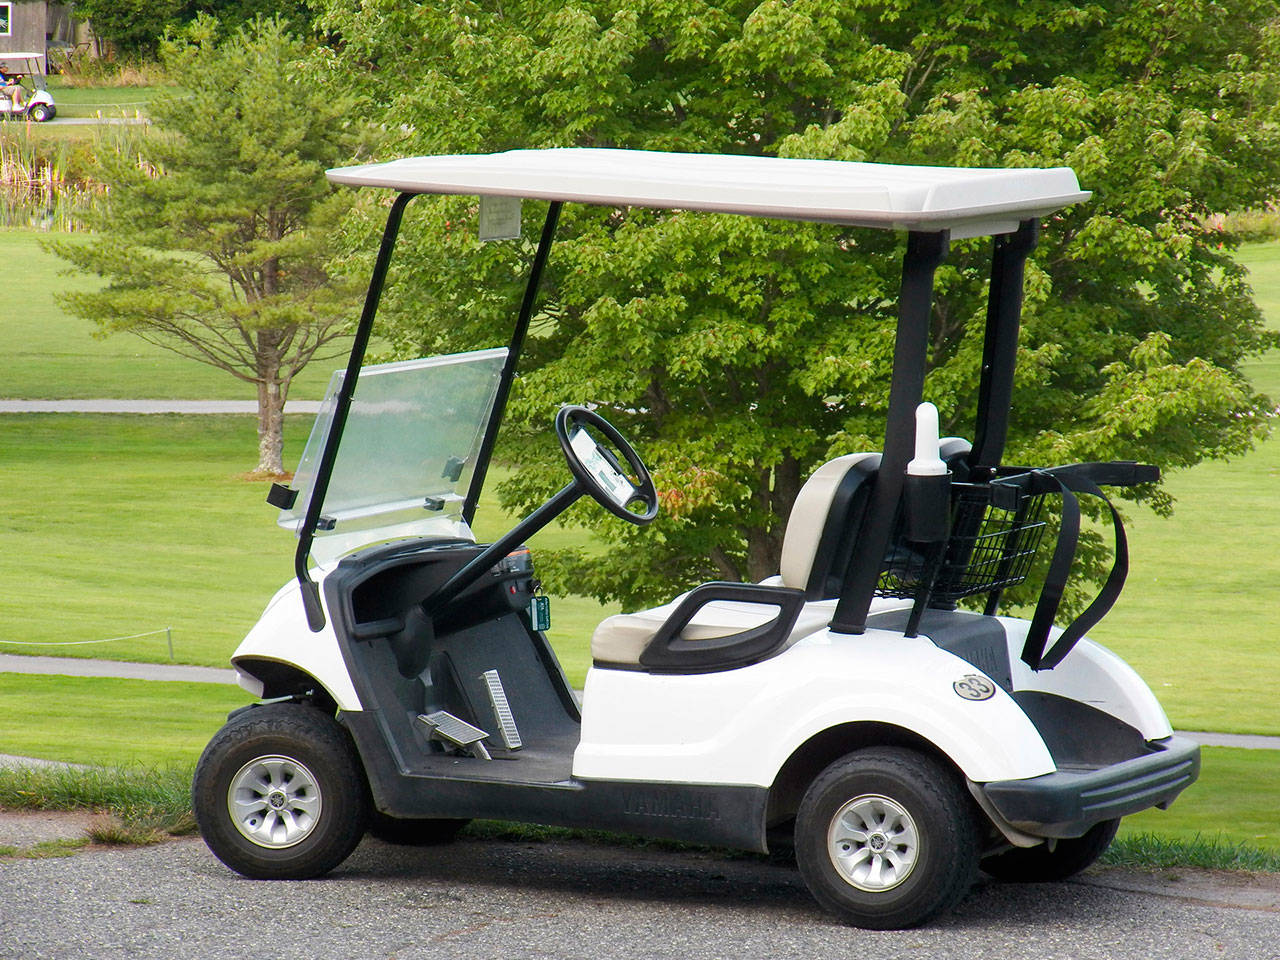 Unknown suspects recently broke into Cascade Golf Course in North Bend and stole three golf carts. Courtesy photo